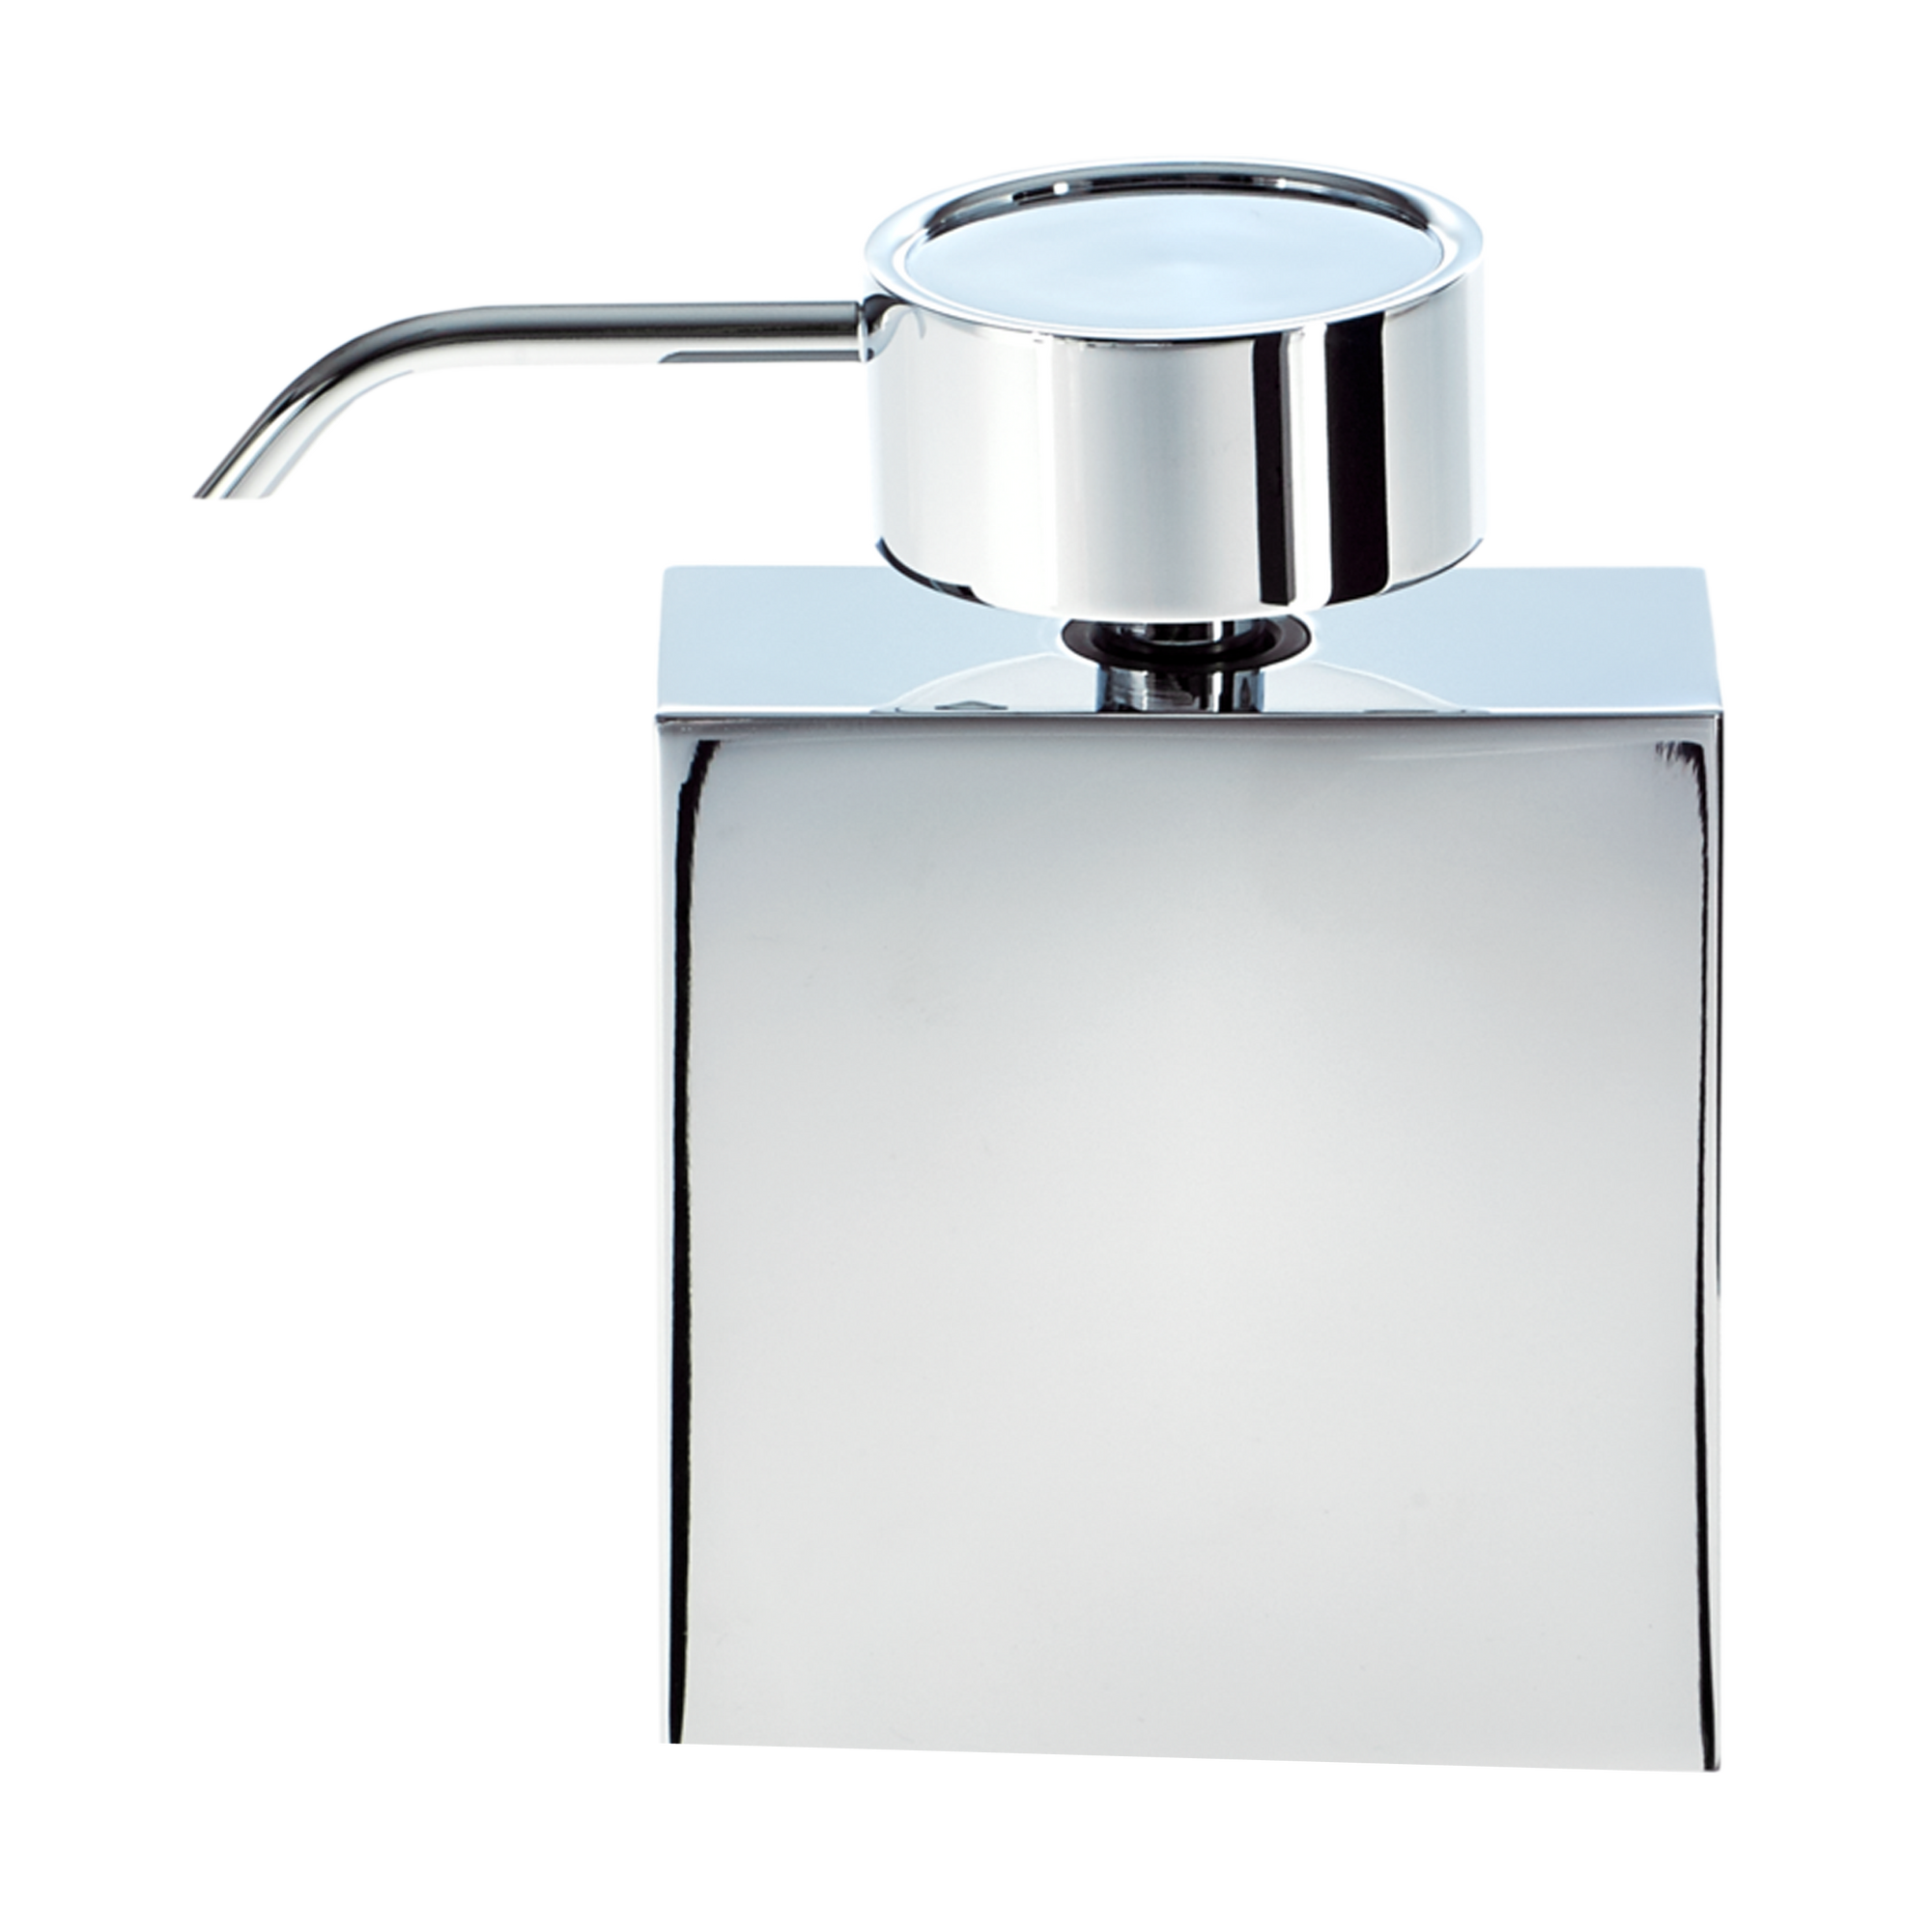 A modern and stylish cubic soap dispenser featured in an elegant chrome finish.